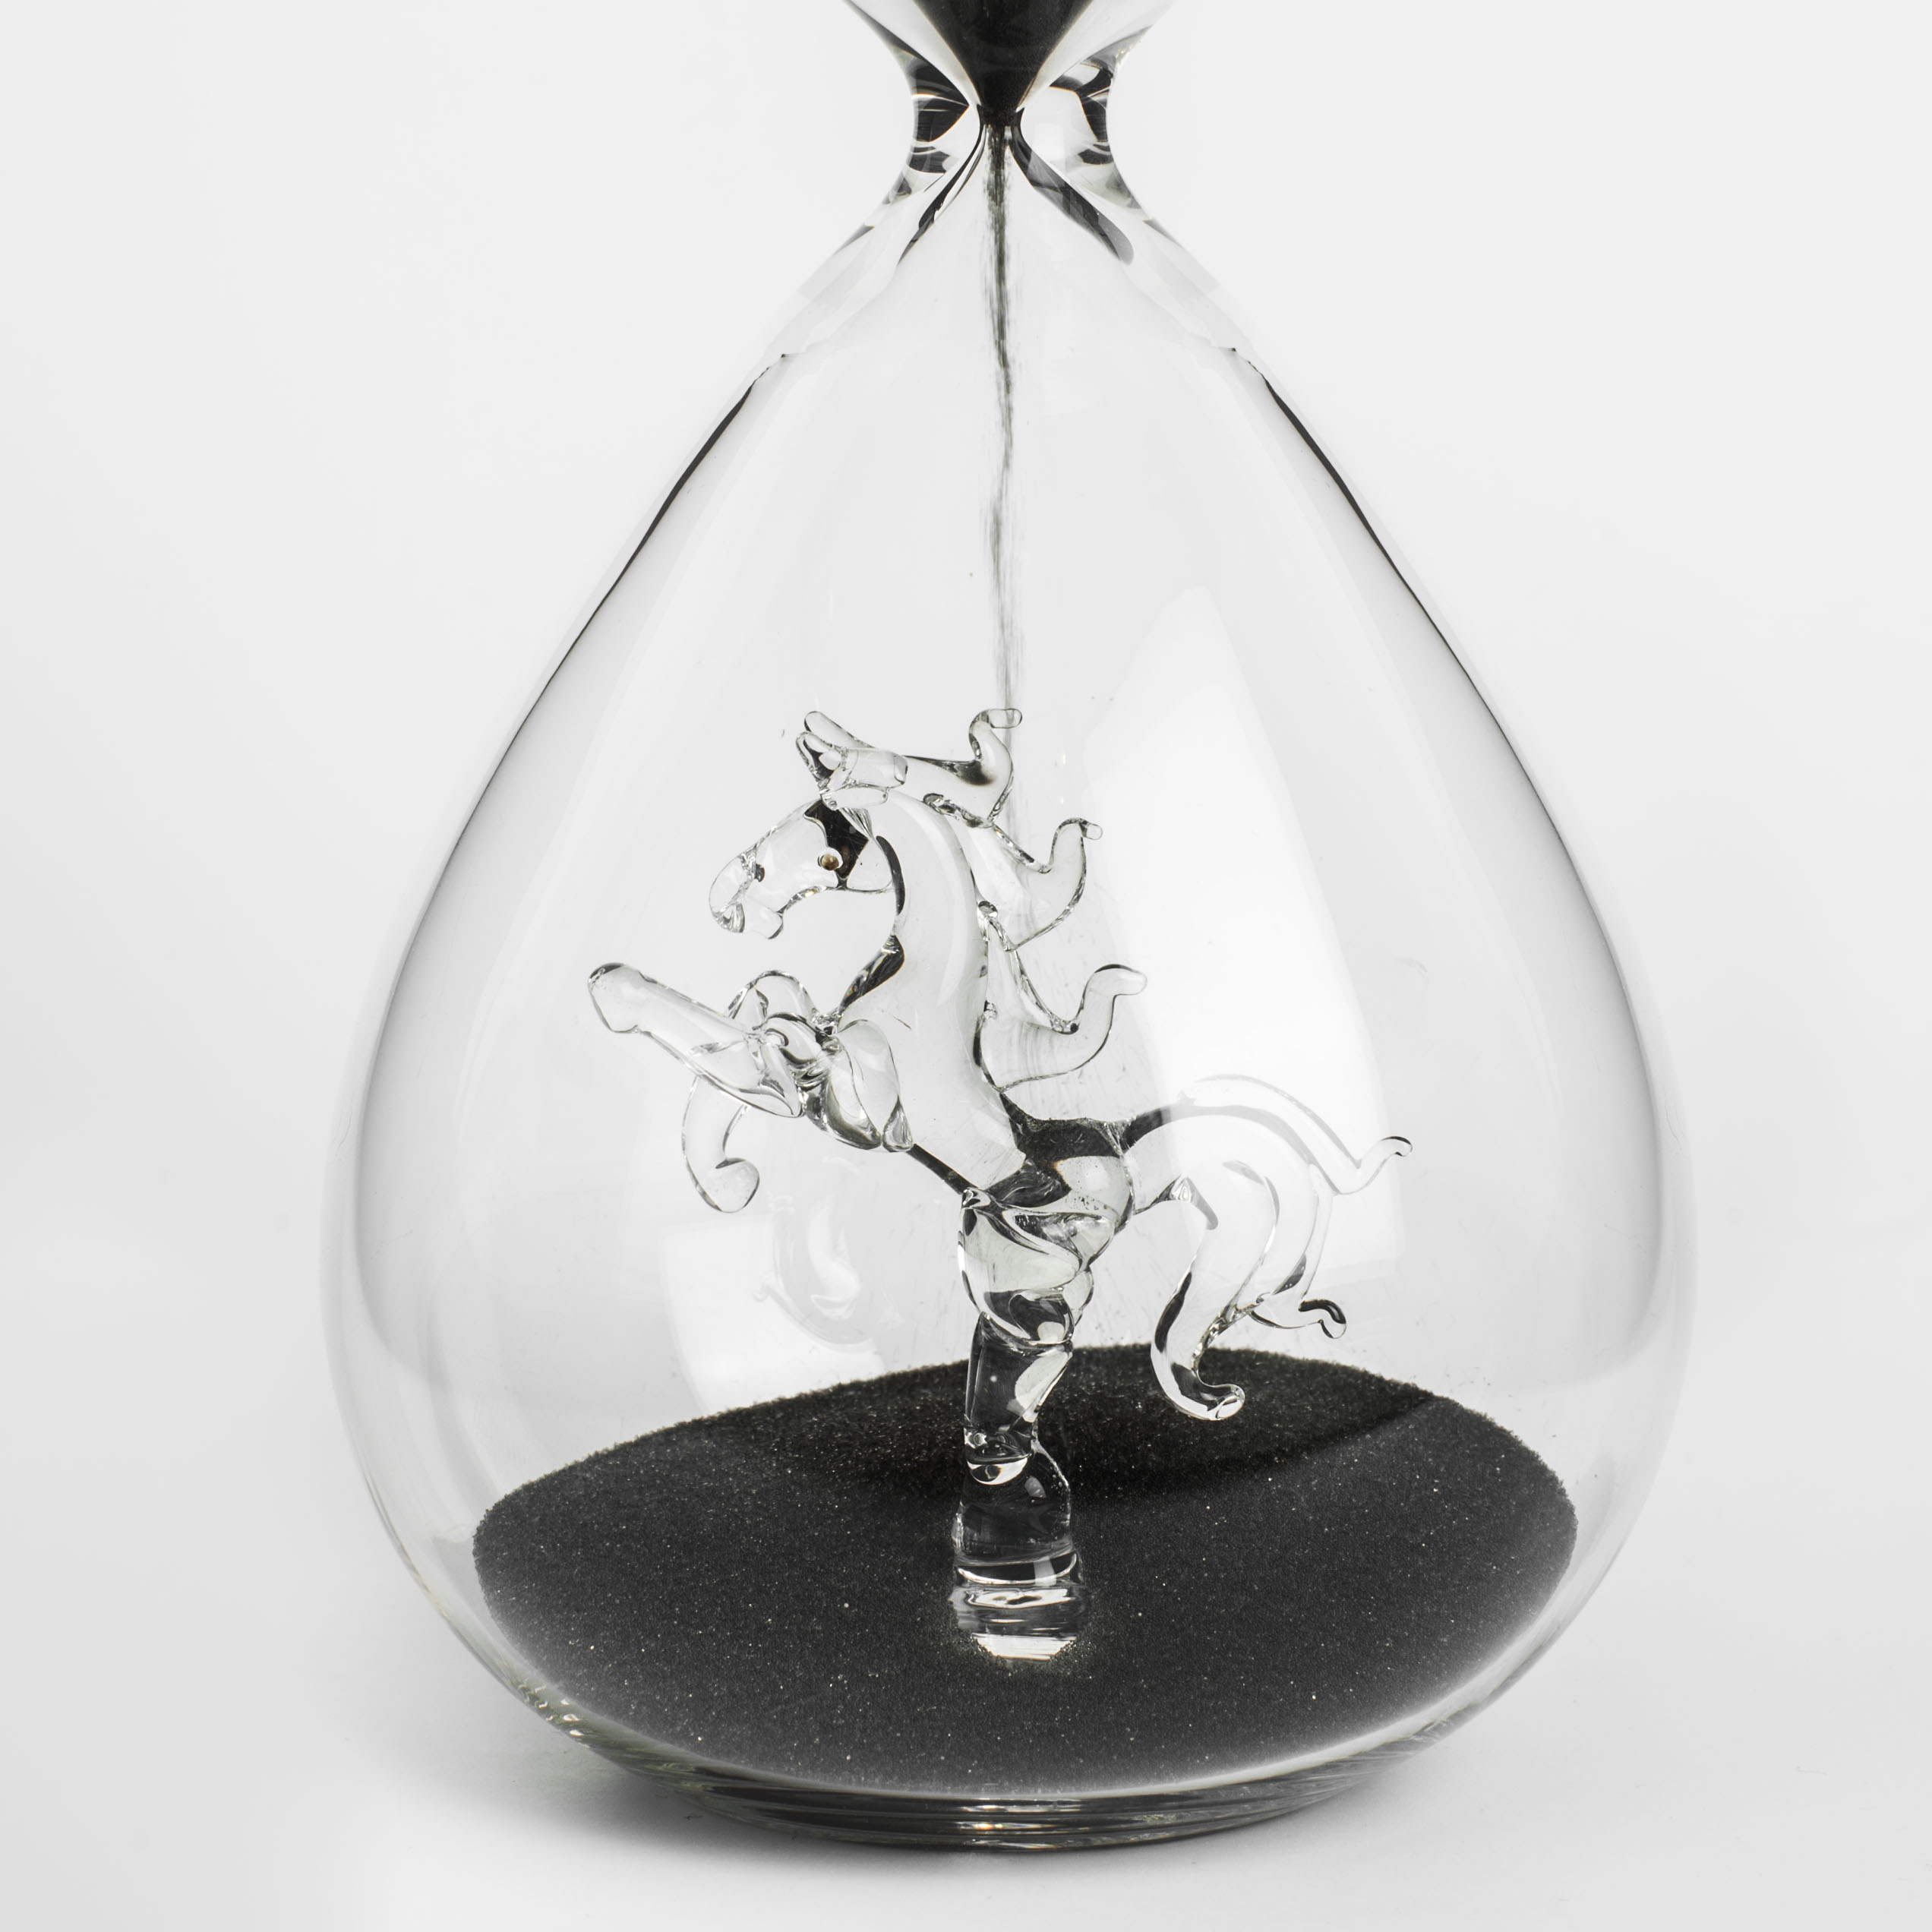 Hourglass clock, 20 cm, 15 minutes, Glass / sand, Horse in the sand, Sand time изображение № 4